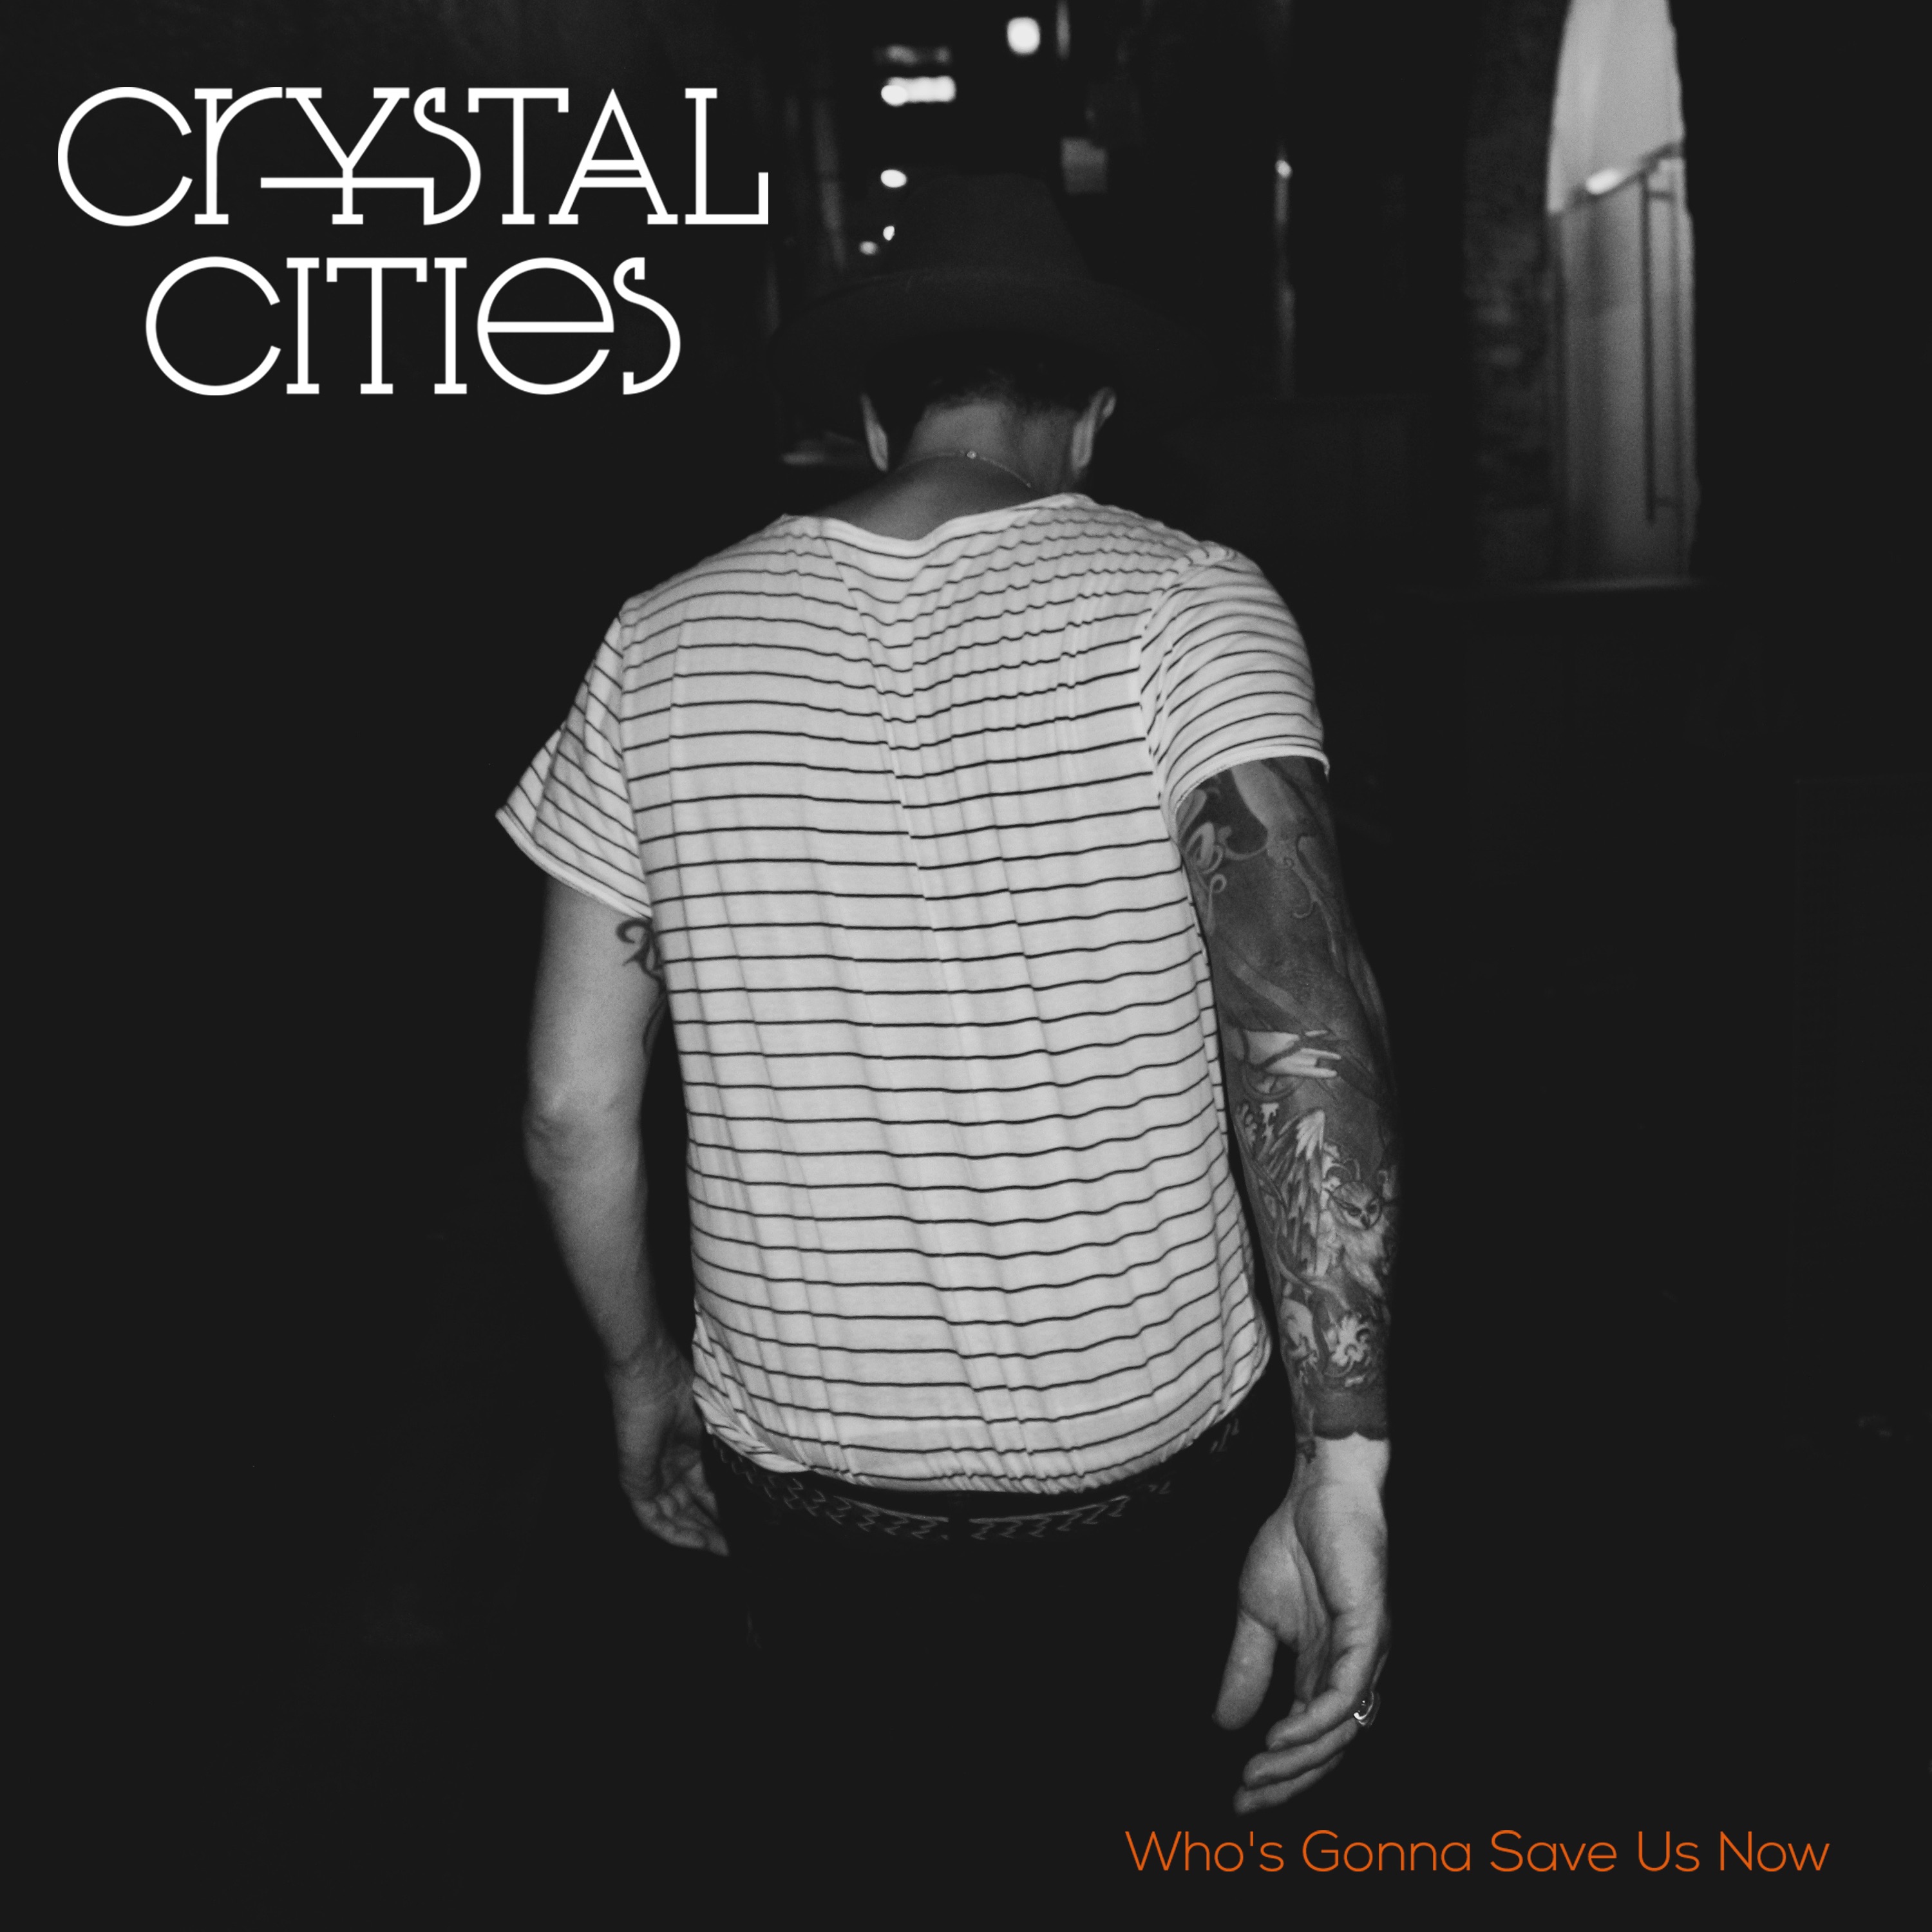 Crystal Cities – “Who’s Gonna Save Us Now”